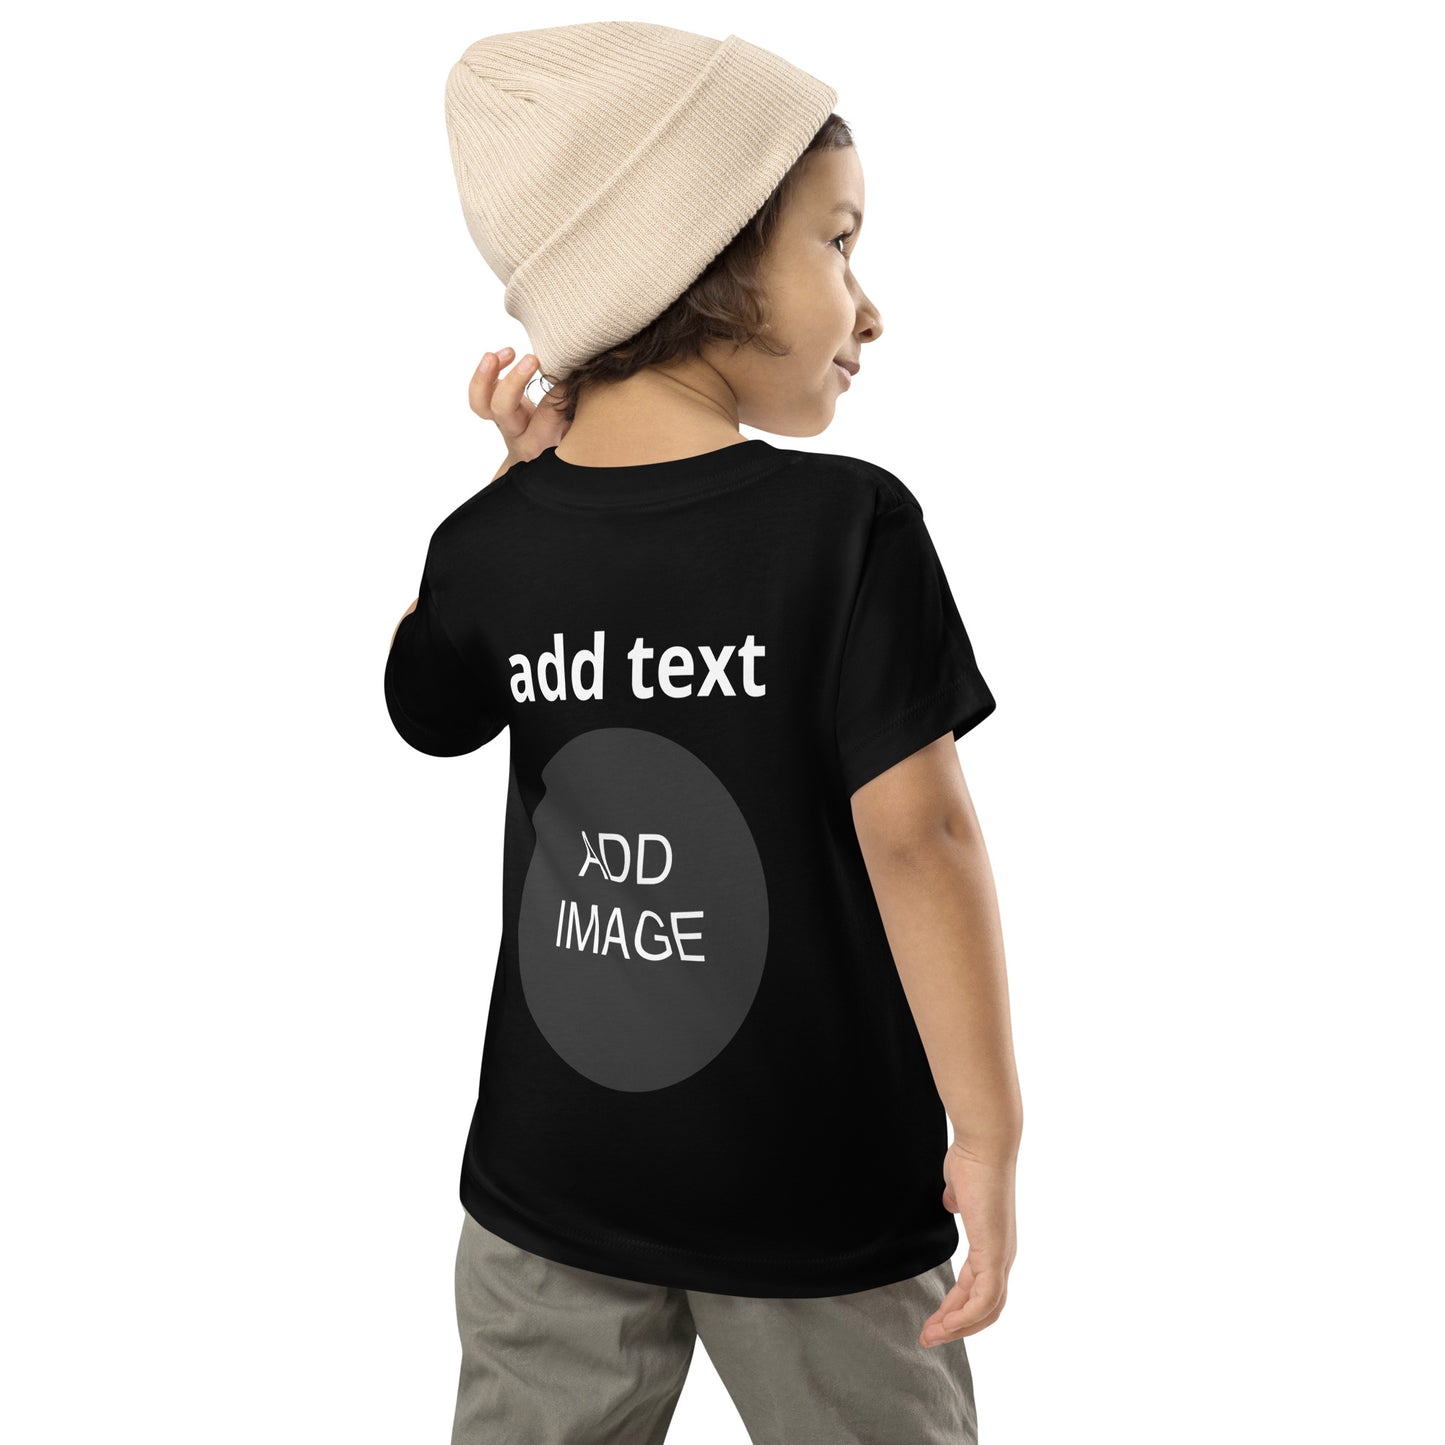 Toddler Short Sleeve Tee 2T-5T (back image & text)